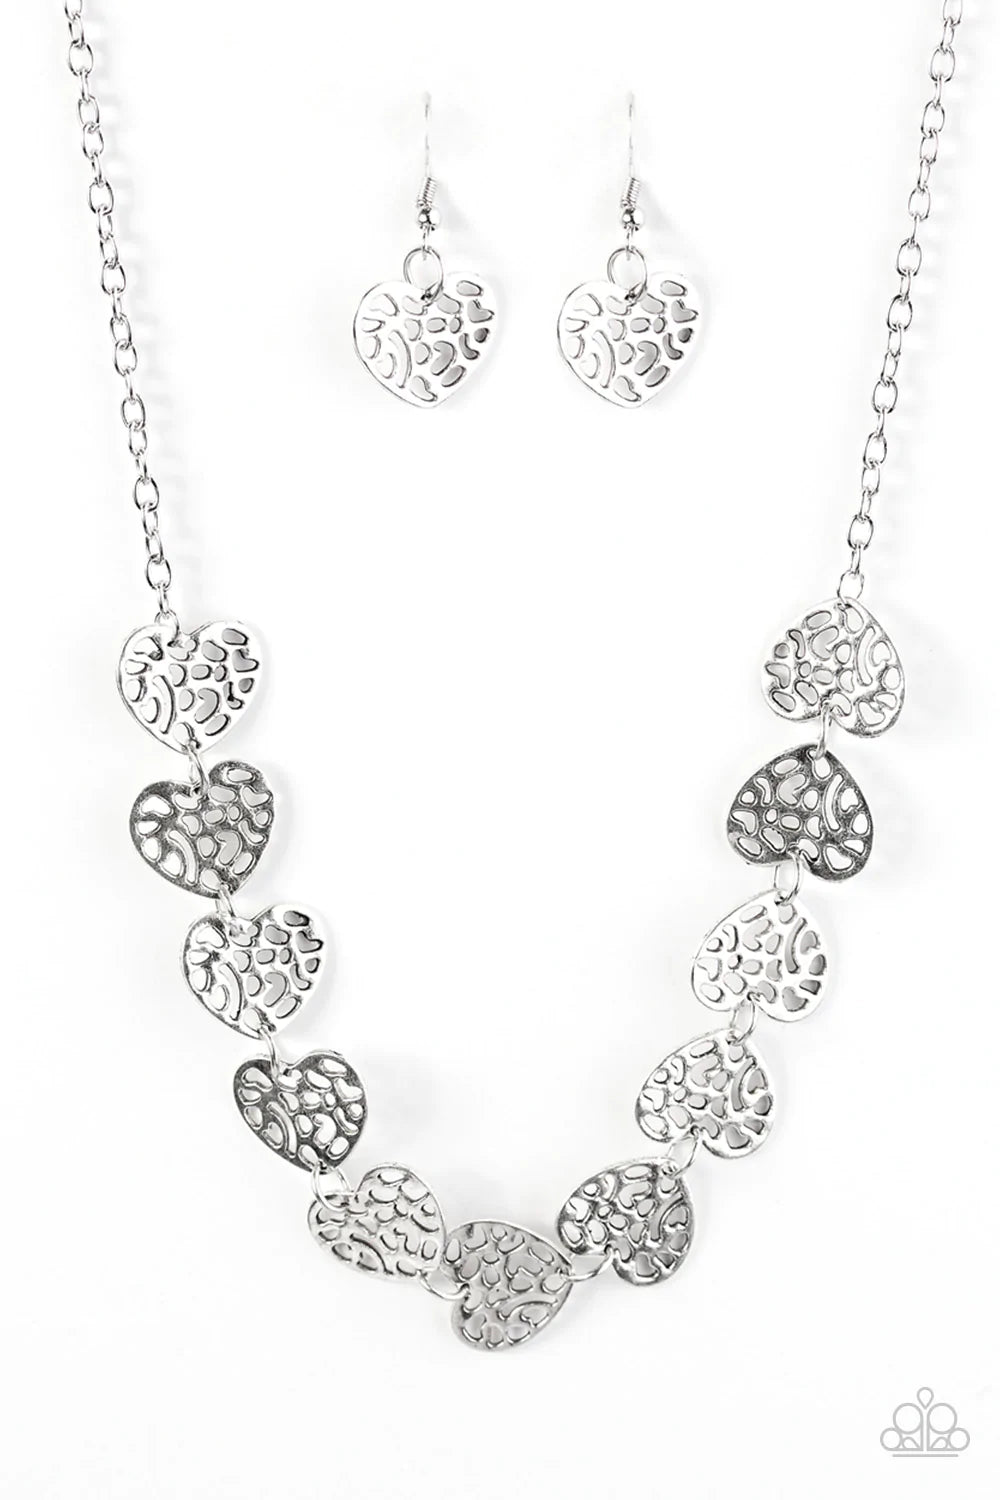 Paparazzi Necklace ~ With My HOLE Heart - Silver